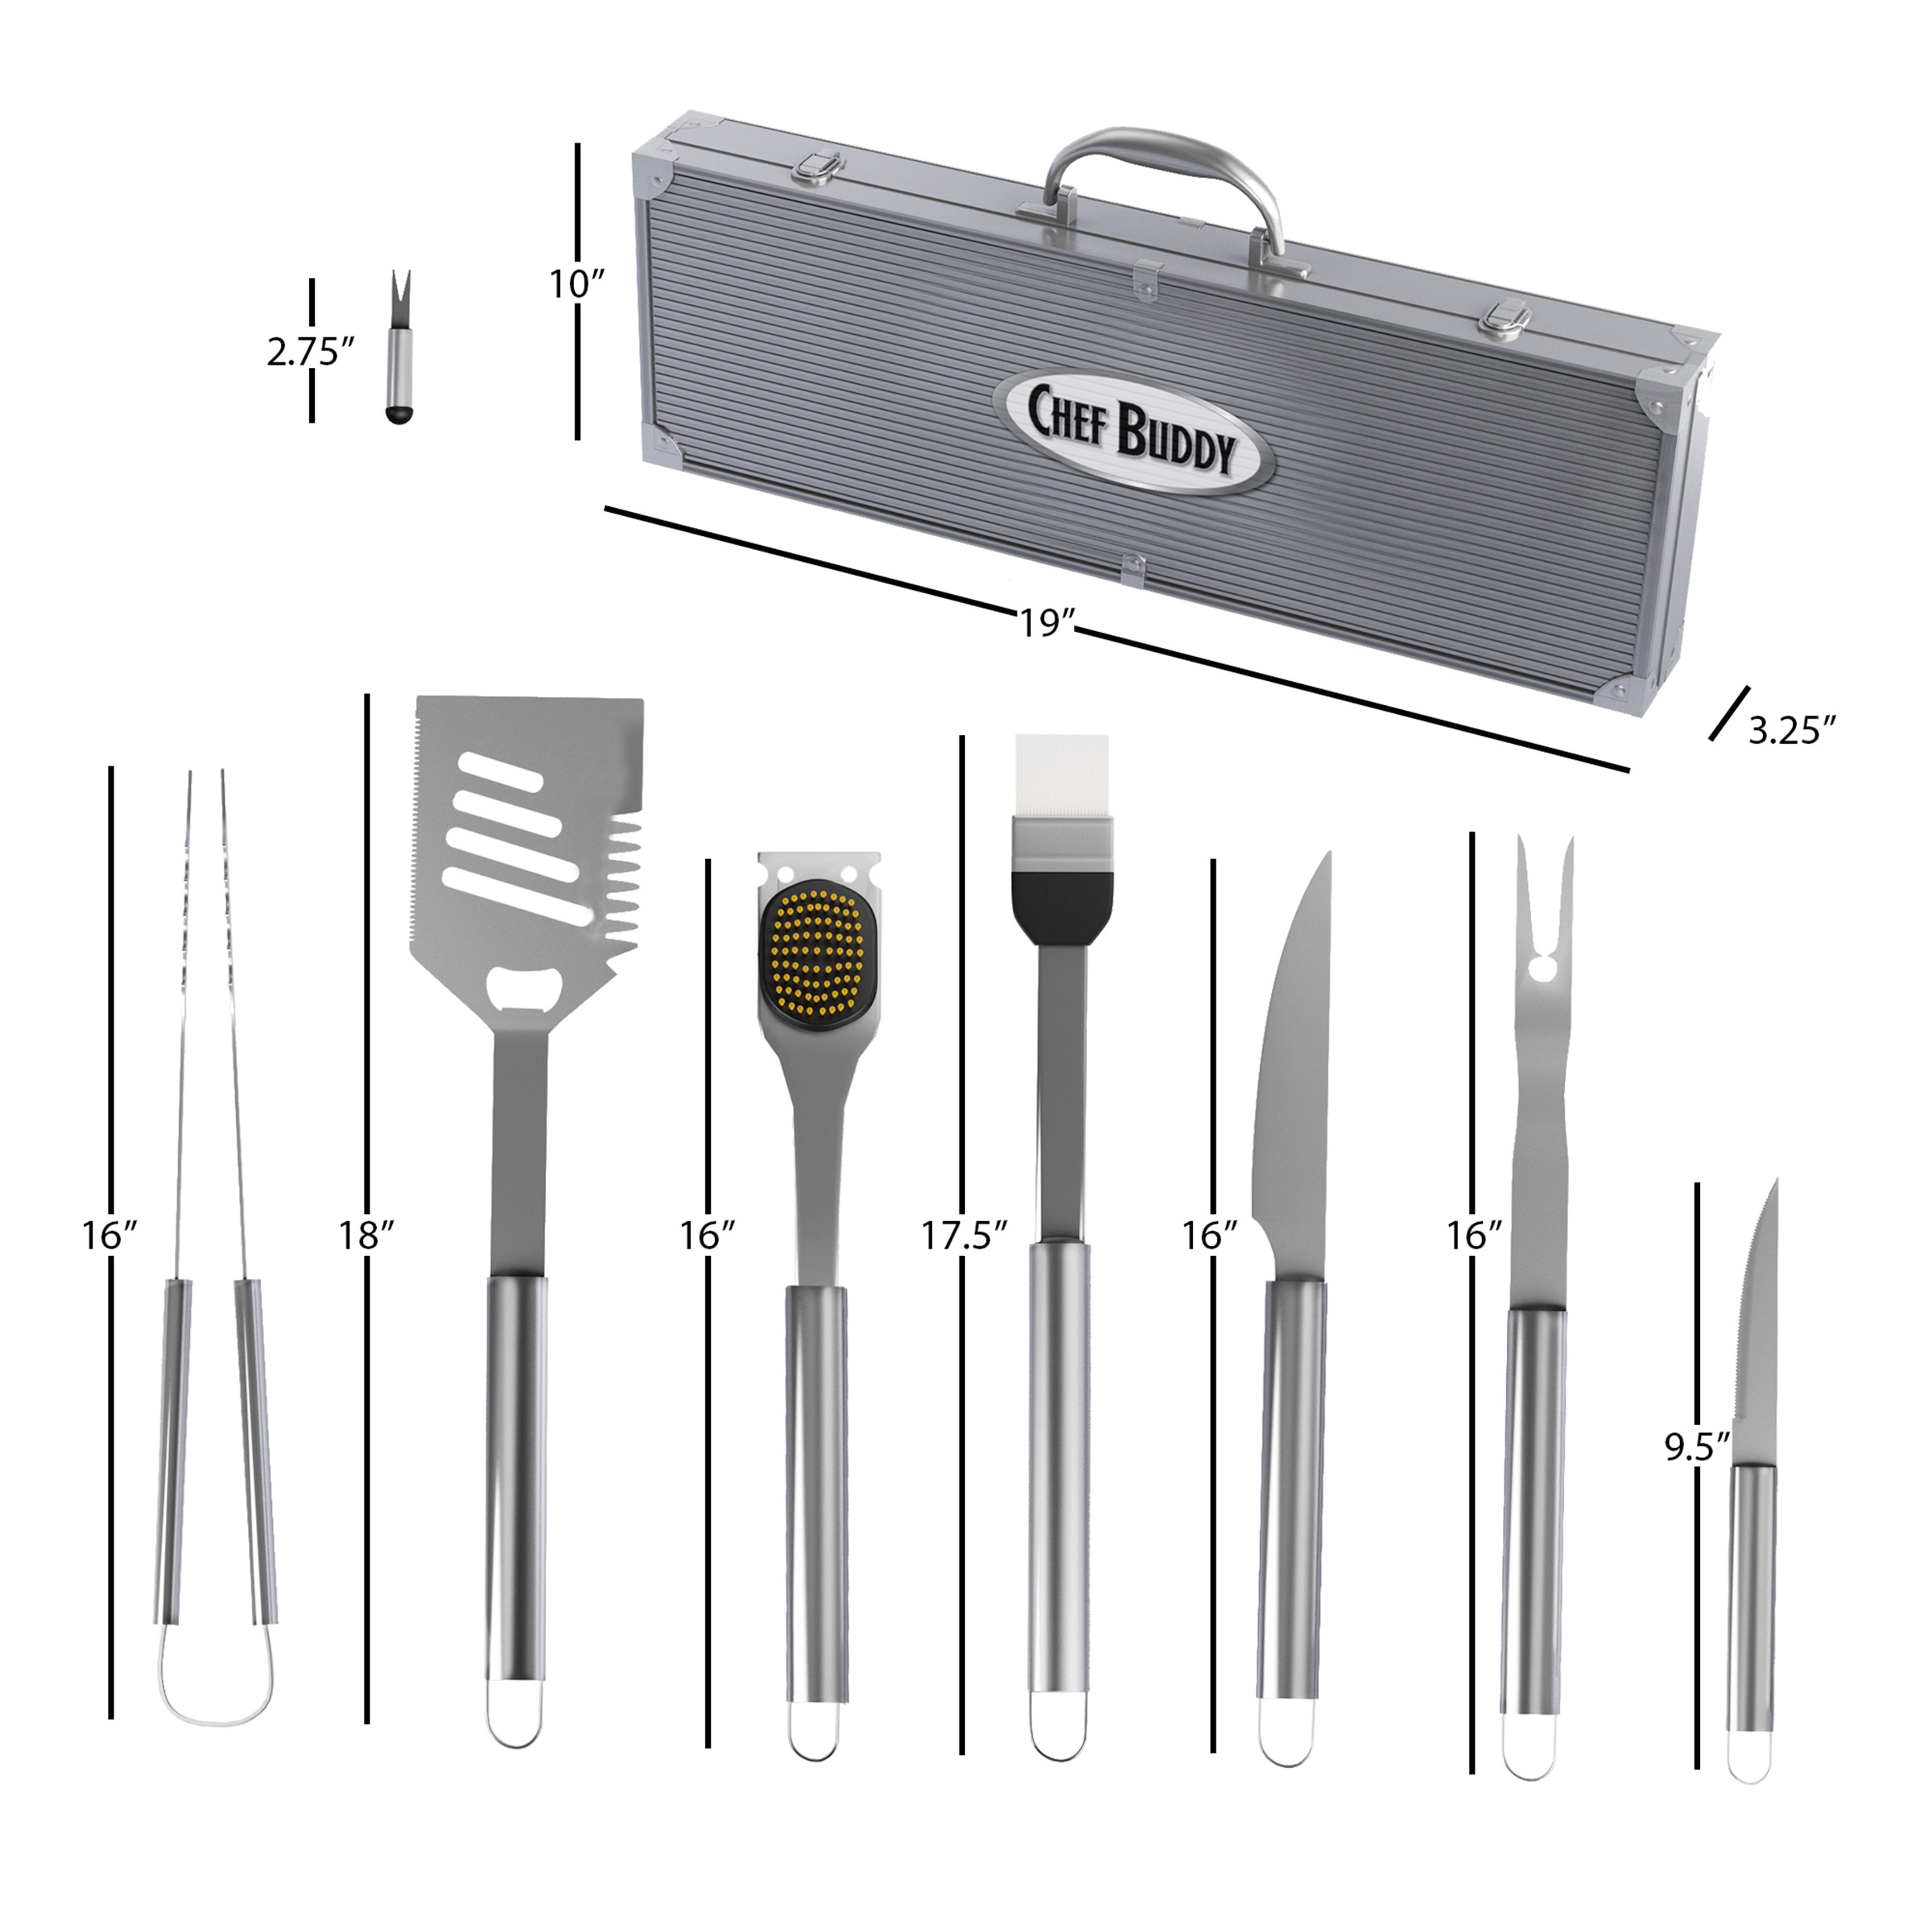 Chef Buddy BBQ Grill Accessories and Tools Set with Carrying Case, 19 Pieces - image 2 of 7